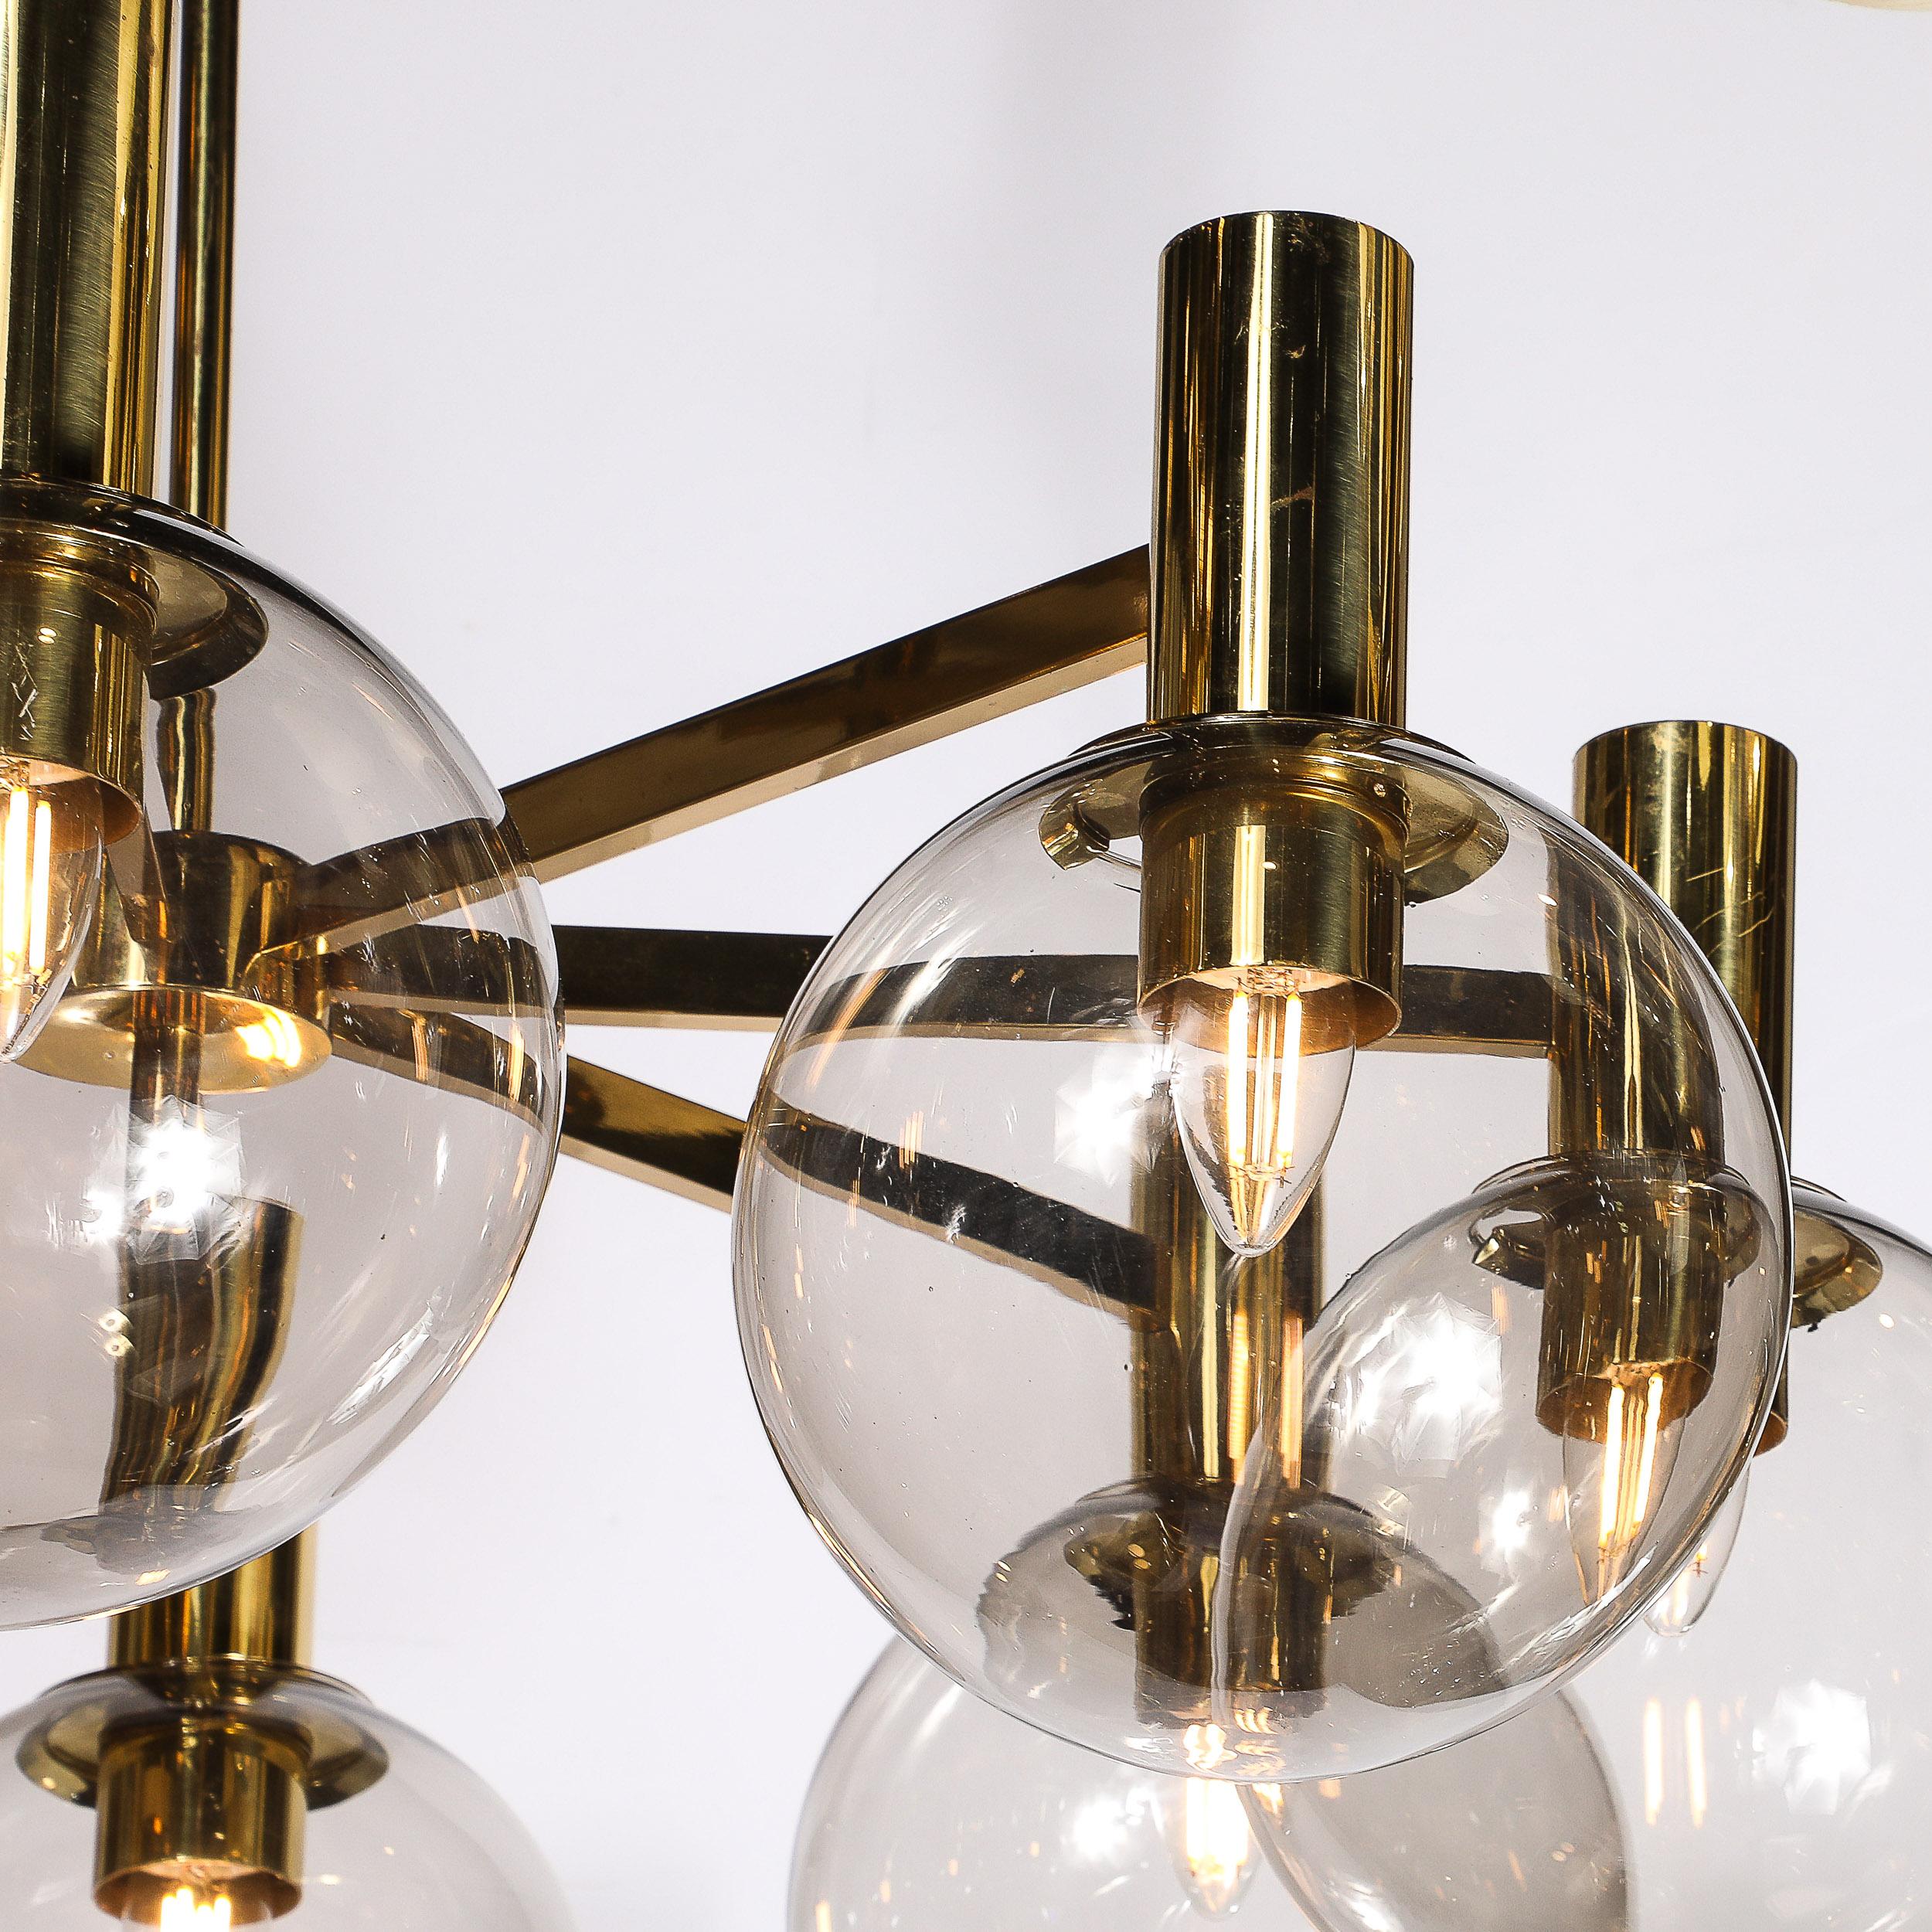 Mid-Century Modernist 8-Globe Polished Brass Chandelier by Hans Agne Jakobsson In Excellent Condition For Sale In New York, NY